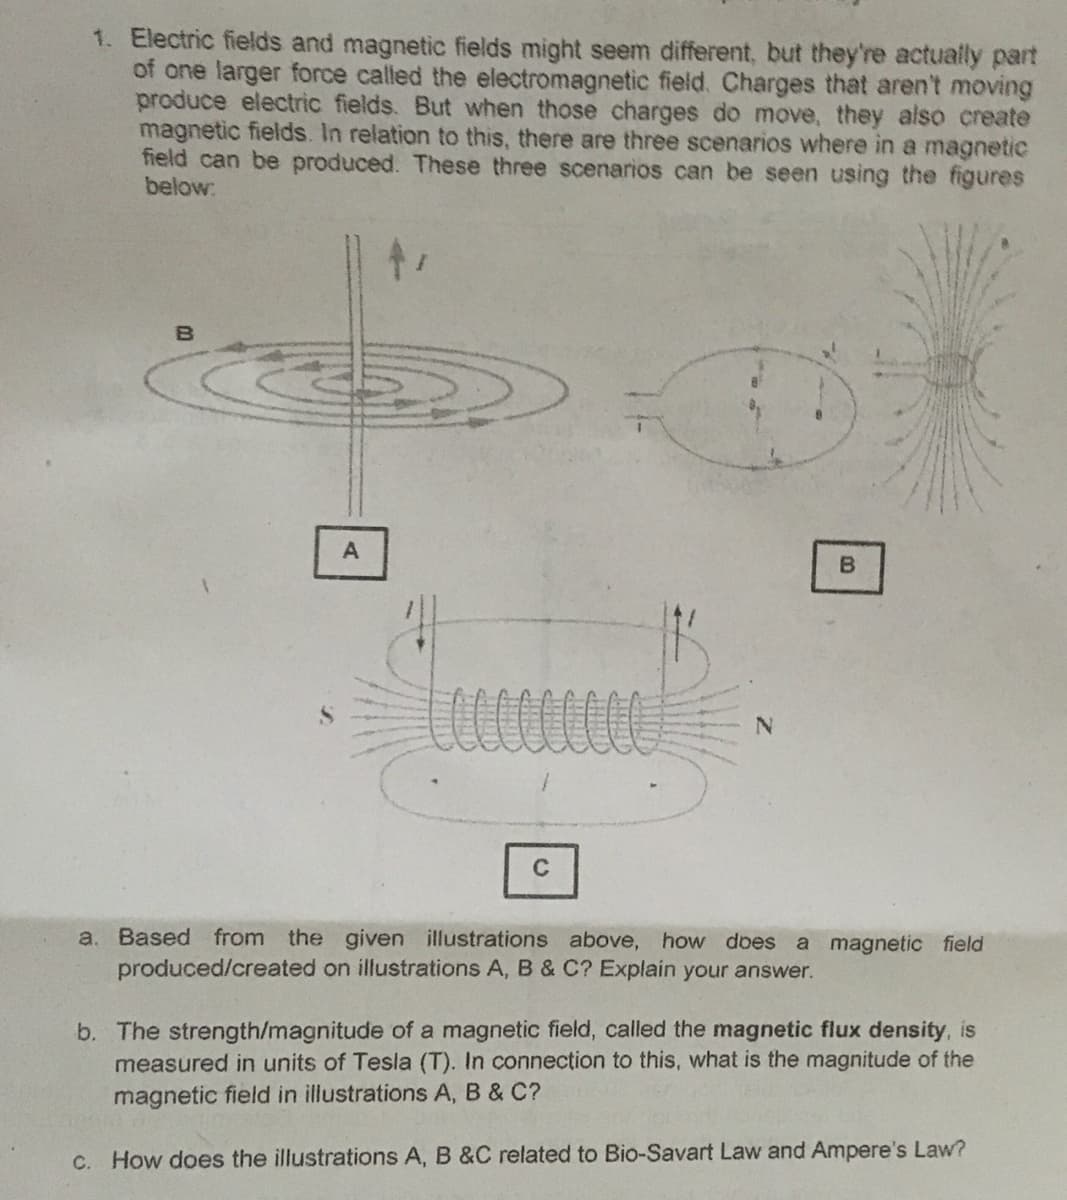 1. Electric fields and magnetic fields might seem different, but they're actually part
of one larger force called the electromagnetic field. Charges that aren't moving
produce electric fields. But when those charges do move, they also create
magnetic fields. In relation to this, there are three scenarios where in a magnetic
field can be produced. These three scenarios can be seen using the figures
below:
C
a. Based from the given illustrations above, how does
produced/created on illustrations A, B & C? Explain your answer.
a magnetic field
b. The strength/magnitude of a magnetic field, called the magnetic flux density, is
measured in units of Tesla (T). In connection to this, what is the magnitude of the
magnetic field in illustrations A, B & C?
C. How does the illustrations A, B &C related to Bio-Savart Law and Ampere's Law?
